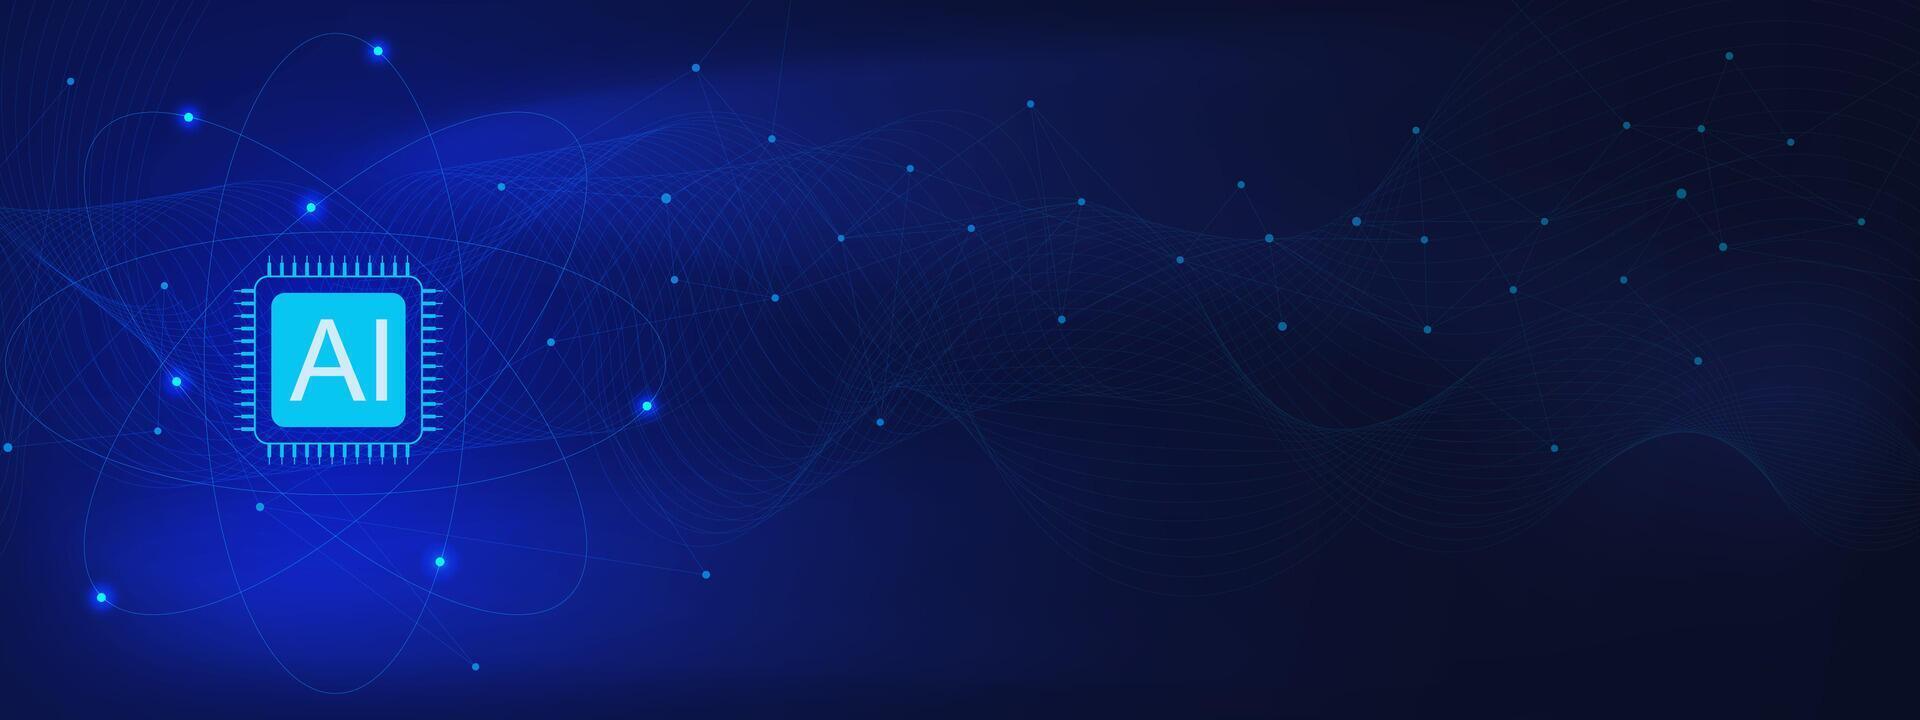 Microchip with connecting dots and lines for network connection. High computer technology and artificial intelligence concept on dark blue background. Vector illustration.